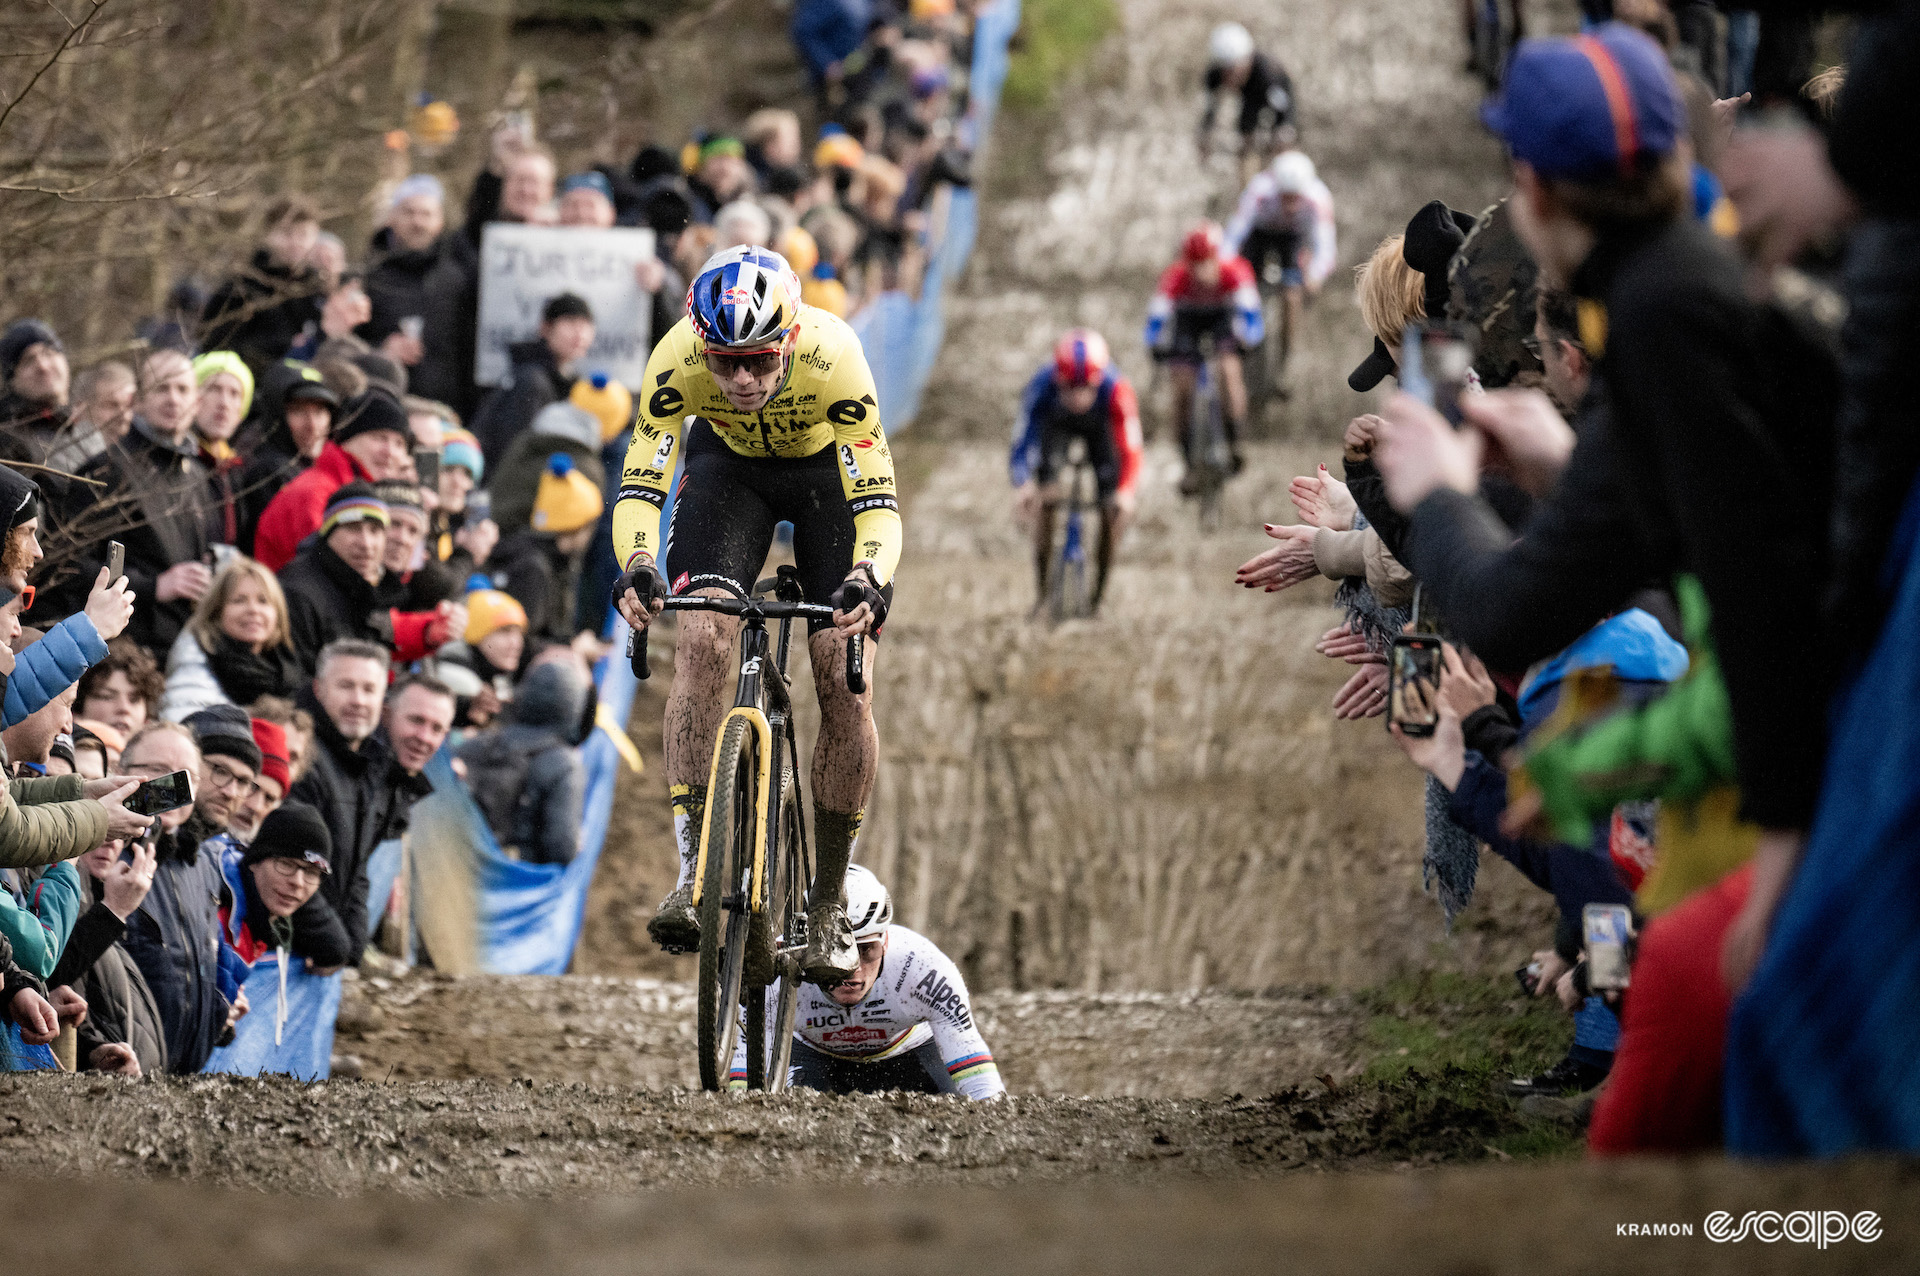 Still clean, Wout van Aert leads the field, including world champion Mathieu van der Poel, in the first lap of the GP Sven Nys, X2O Trofee Baal.